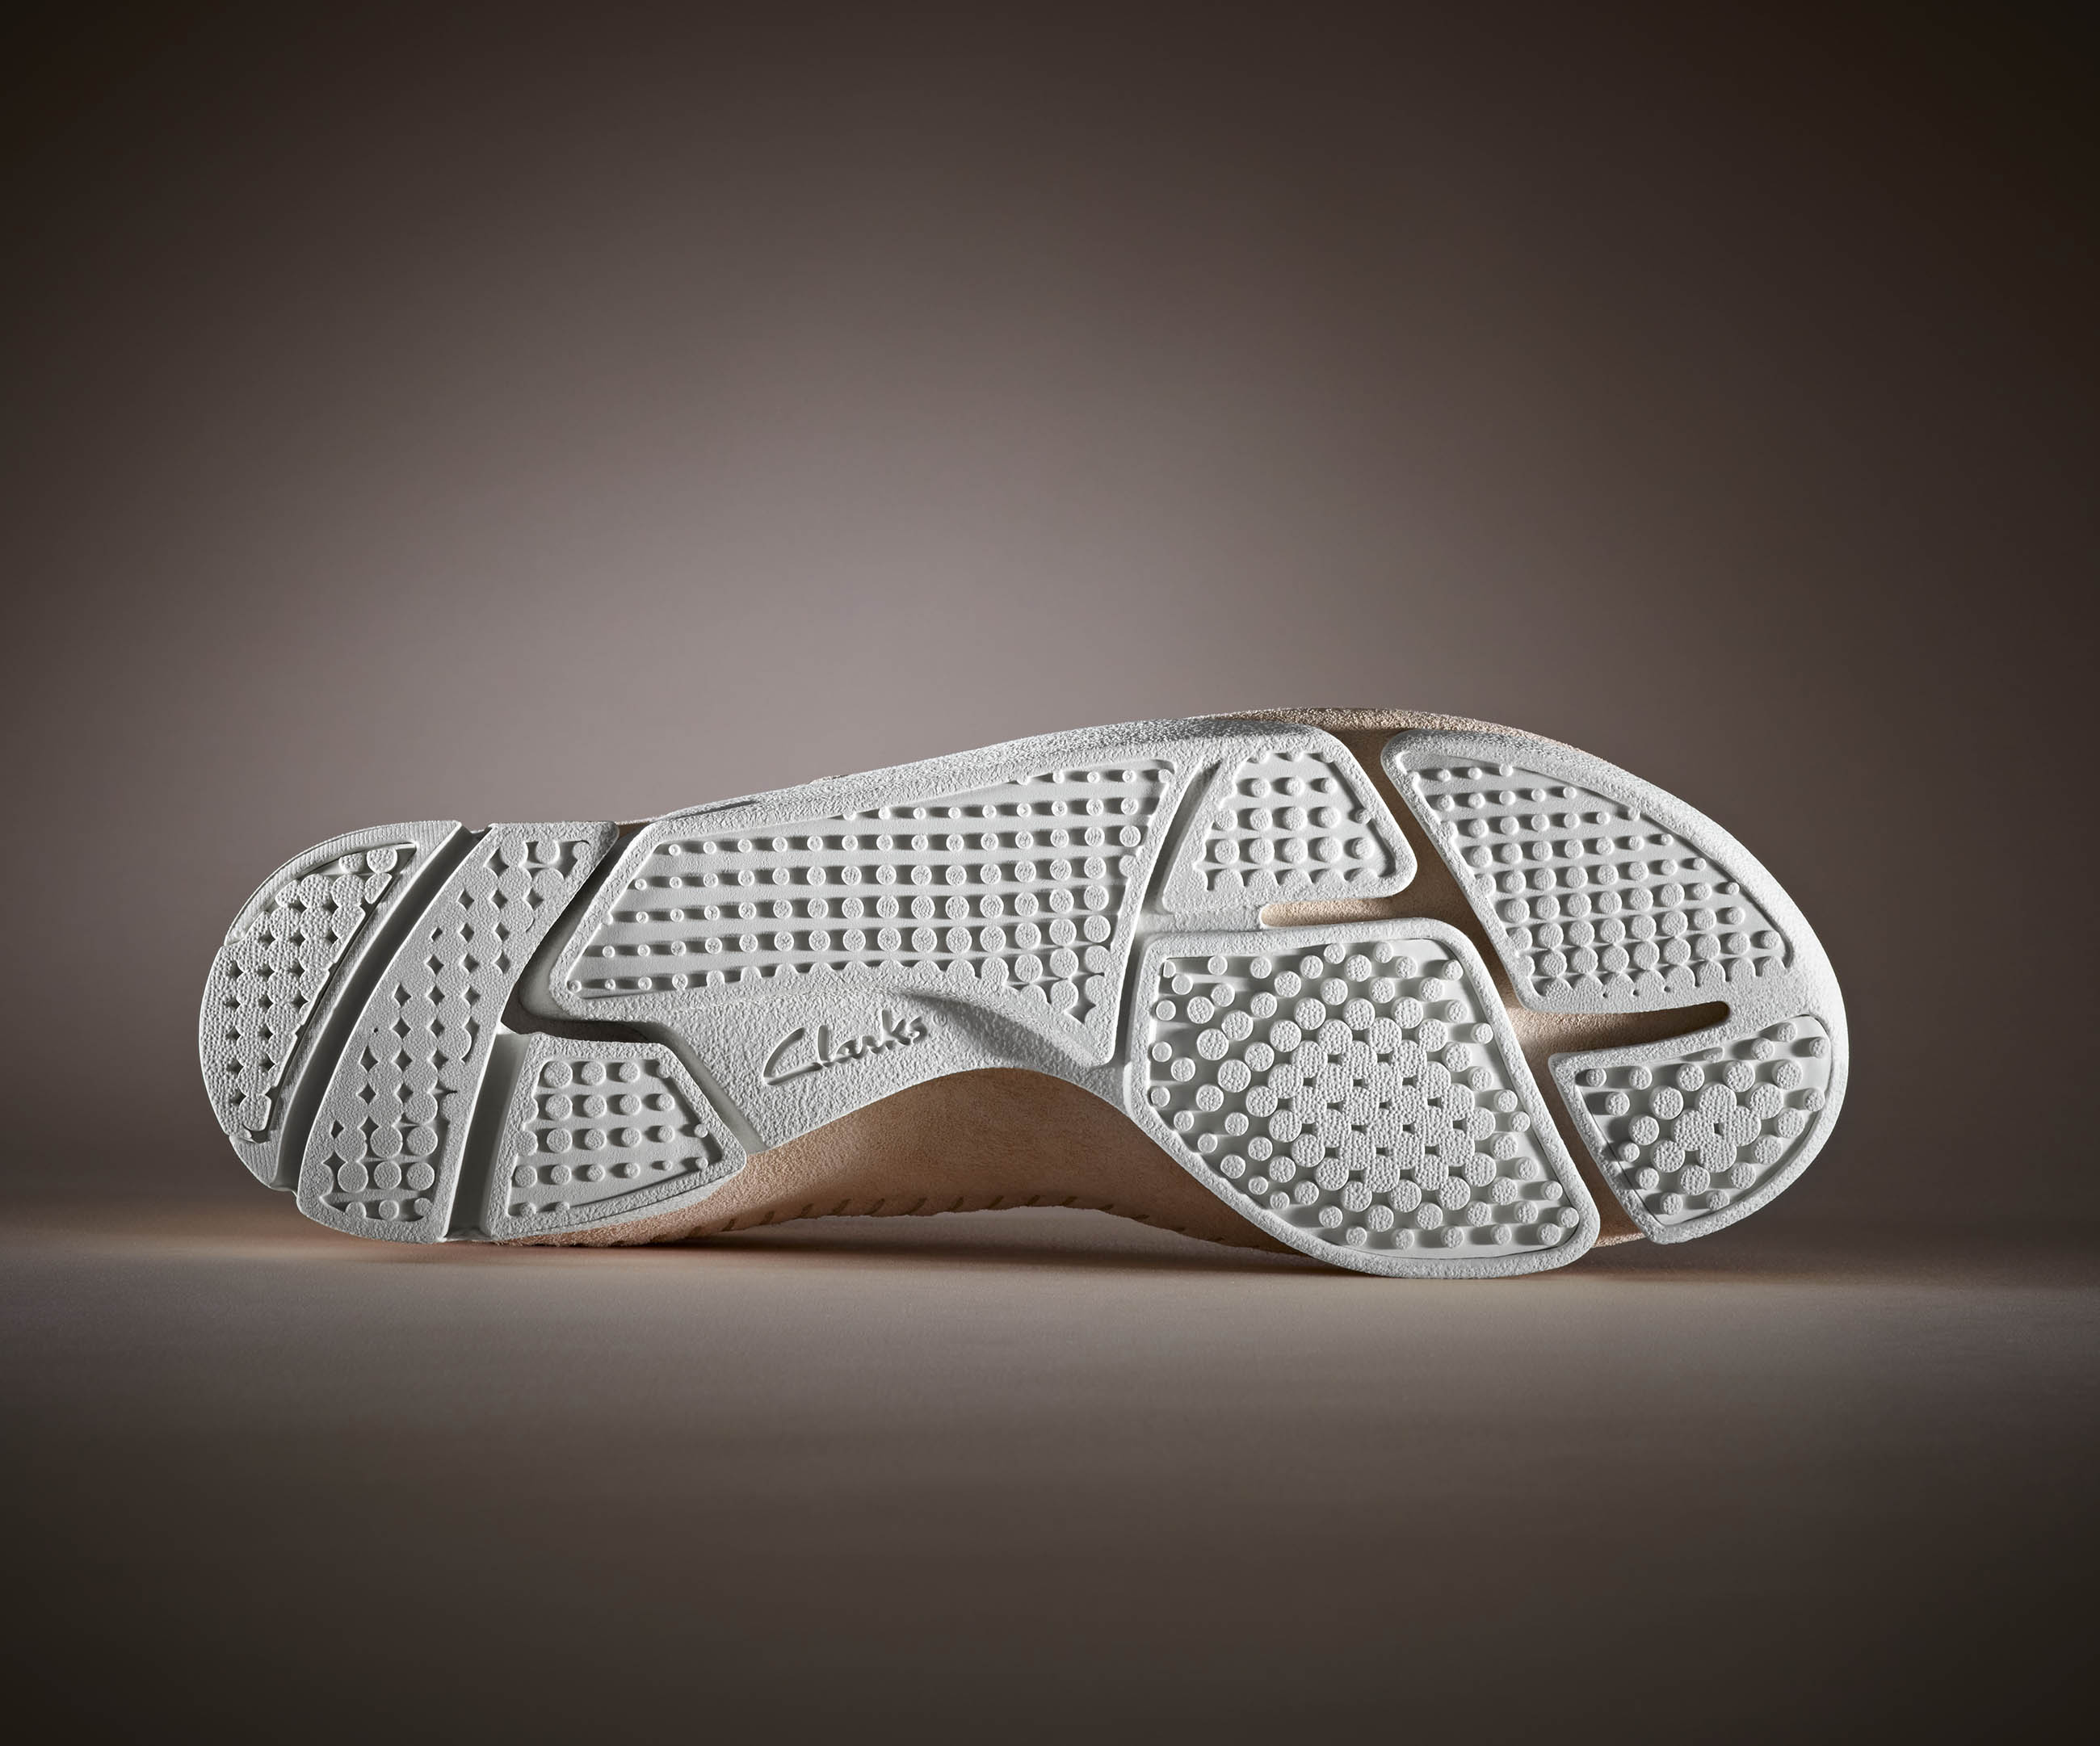 Clarks Introduces Trigenic, a New 